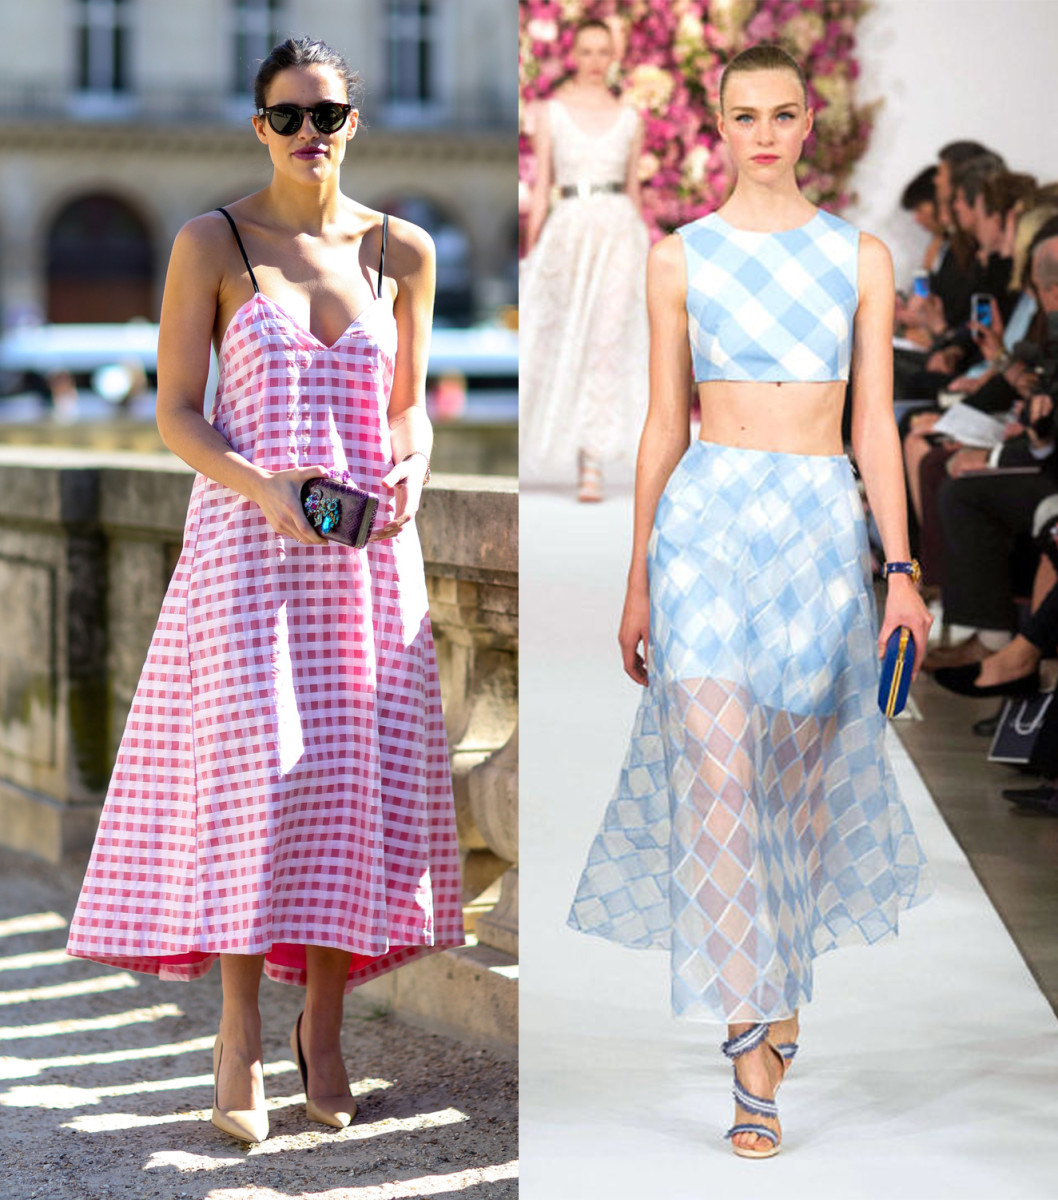 Left: On the street at Paris Fashion Week. Right: On the runway at Oscar de la Renta spring 2015. Photos: Imaxtree.